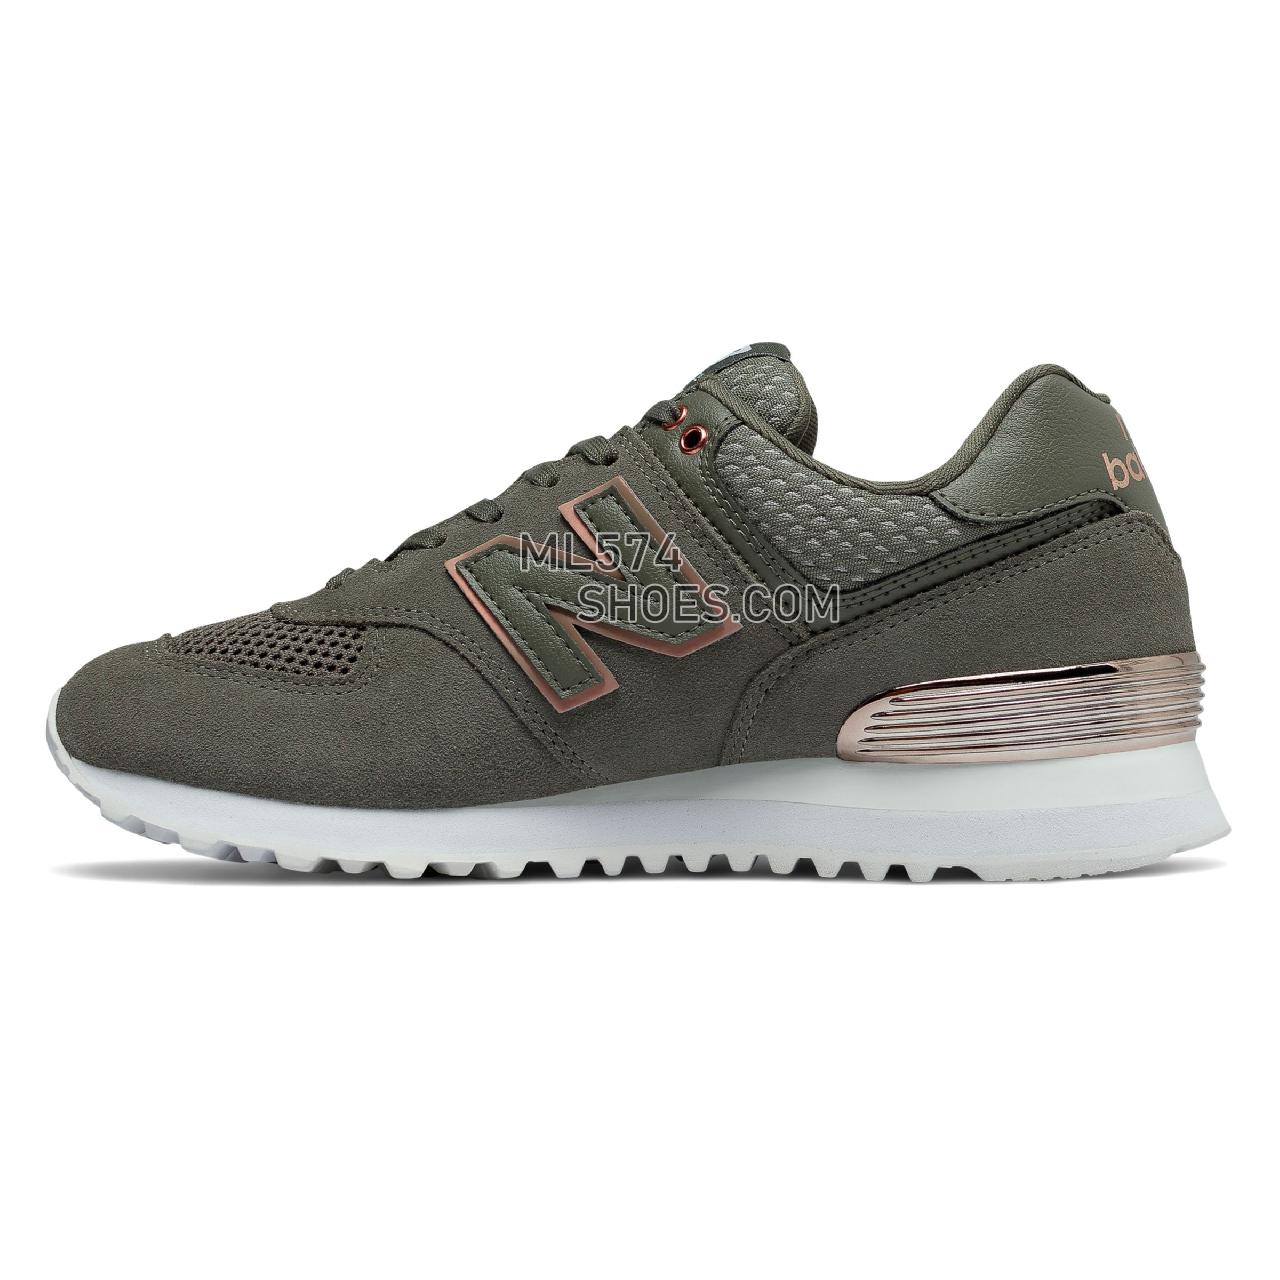 New Balance 574 All Day Rose - Women's 574 - Classic Olive - WL574FSD